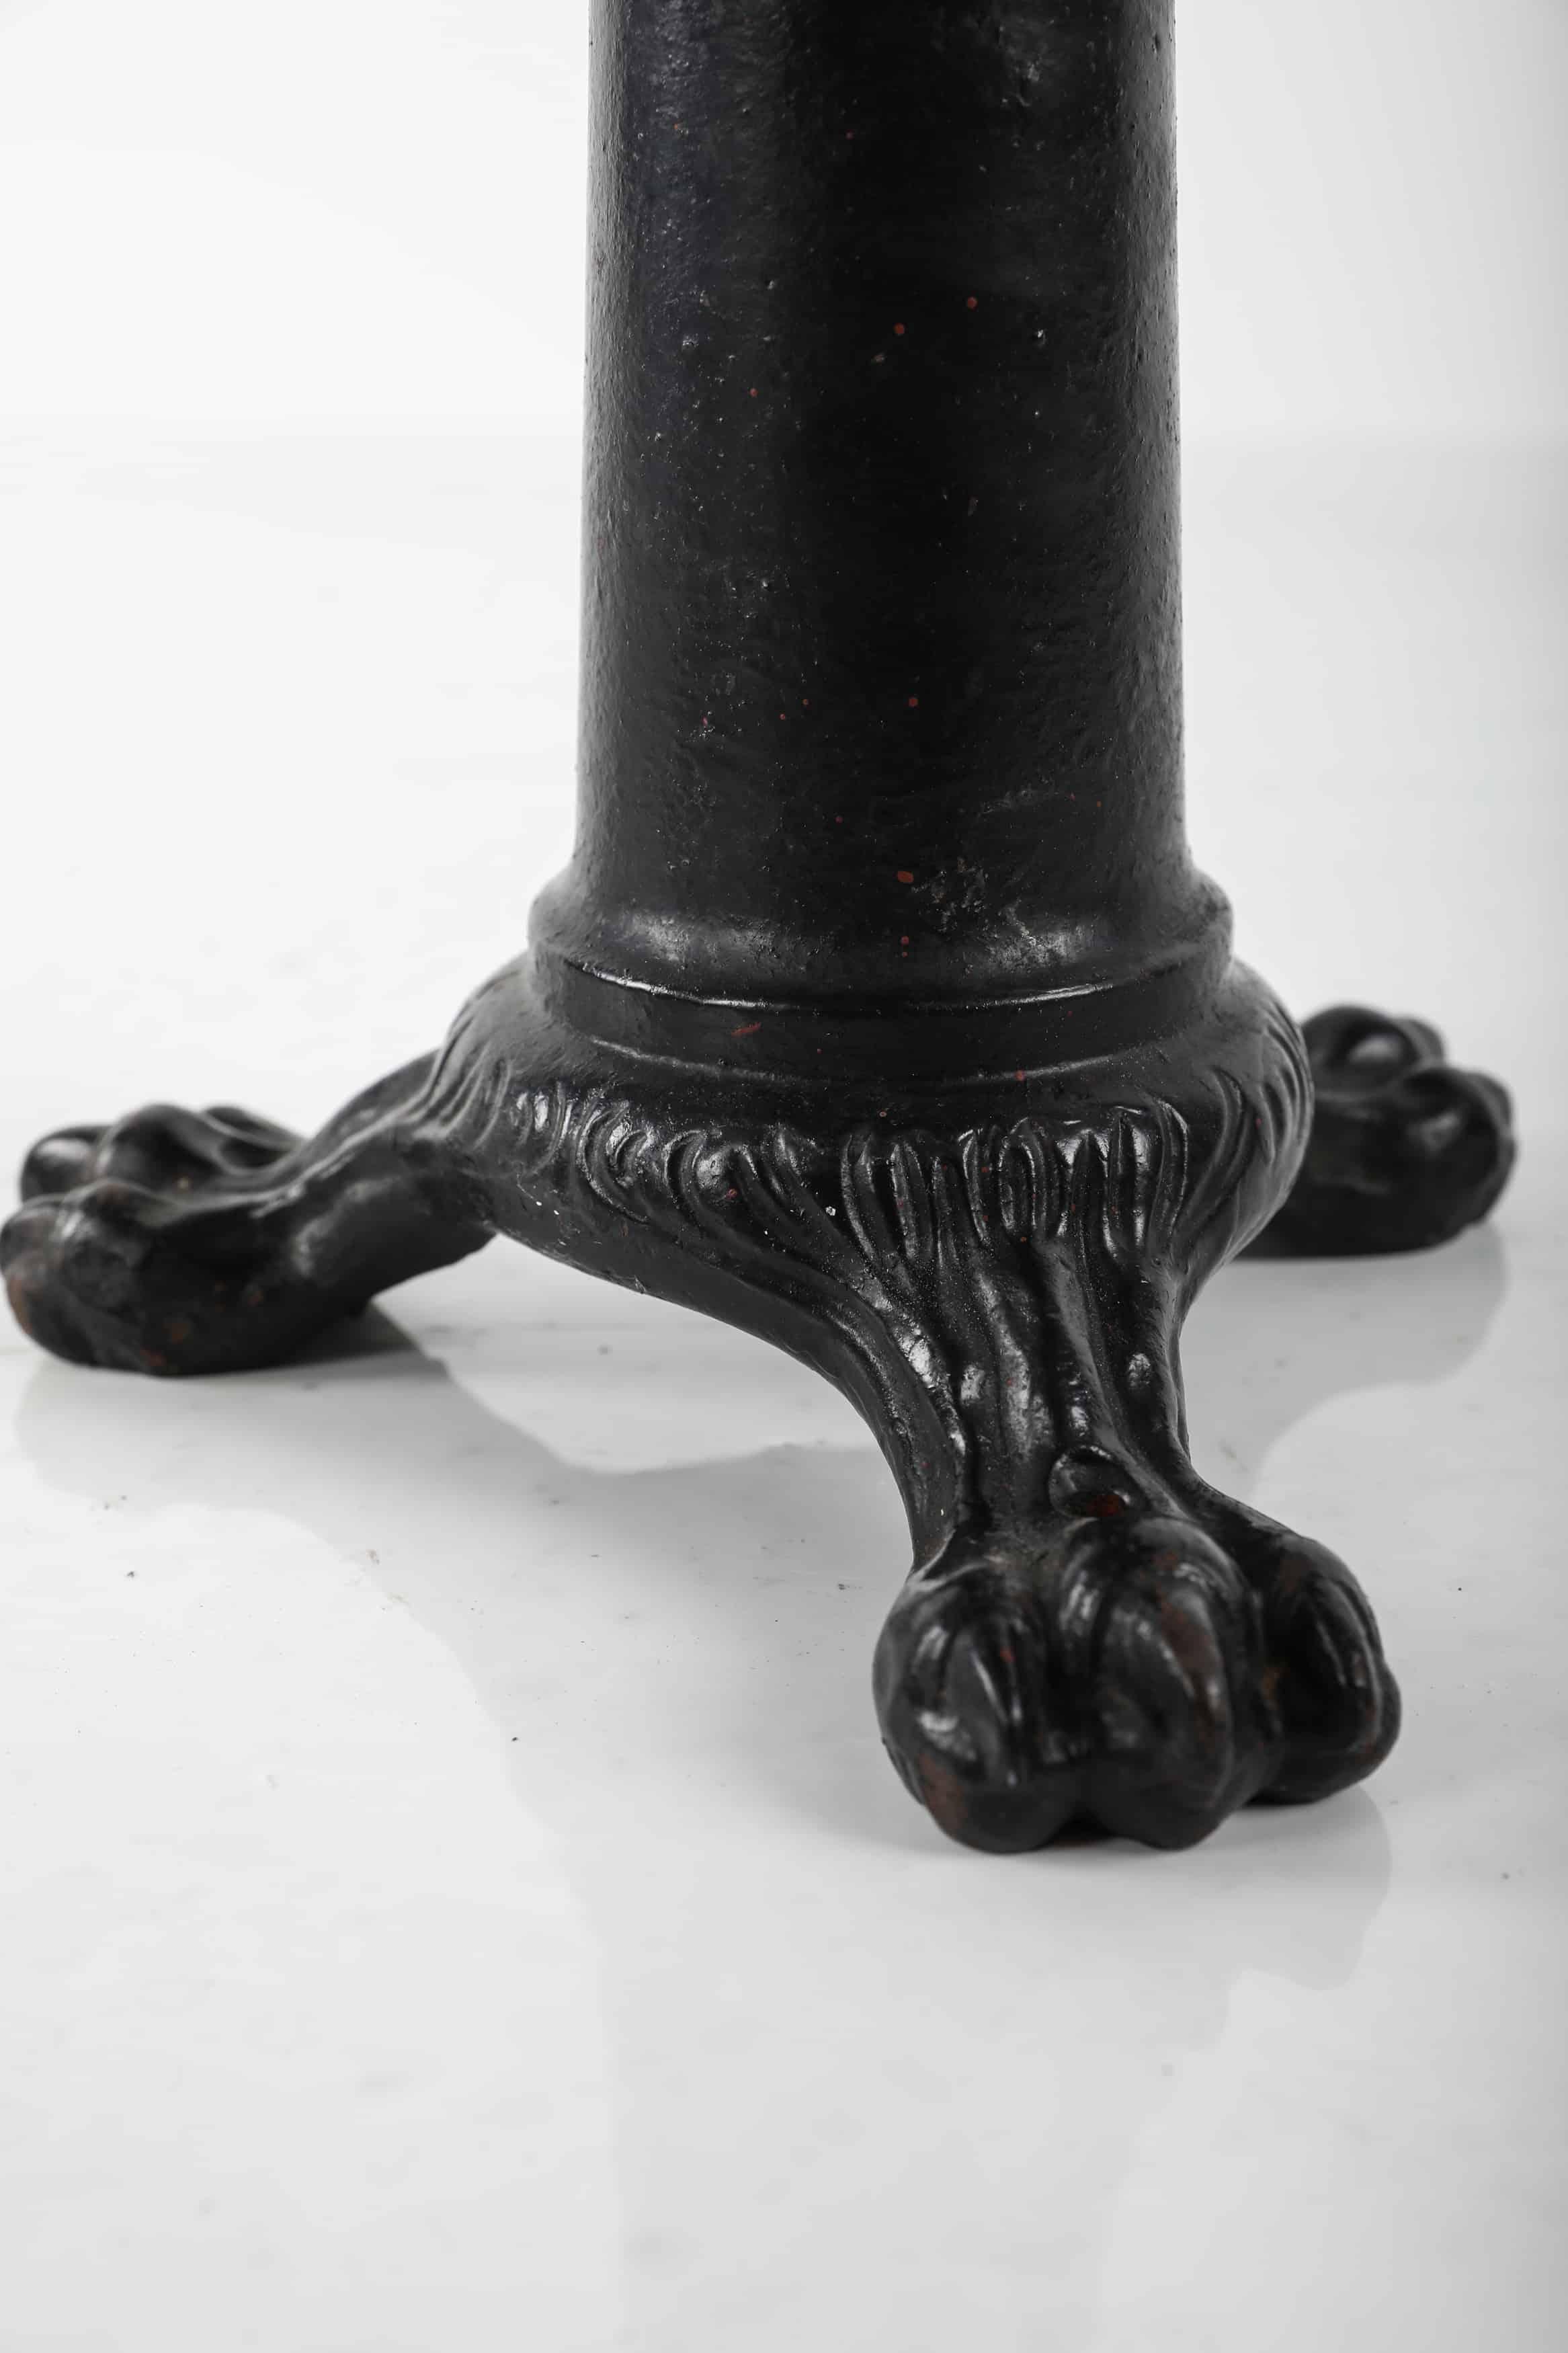 Cast Antique Industrial Early Claw Foot Simanco Singer Factory Stool, C.1900